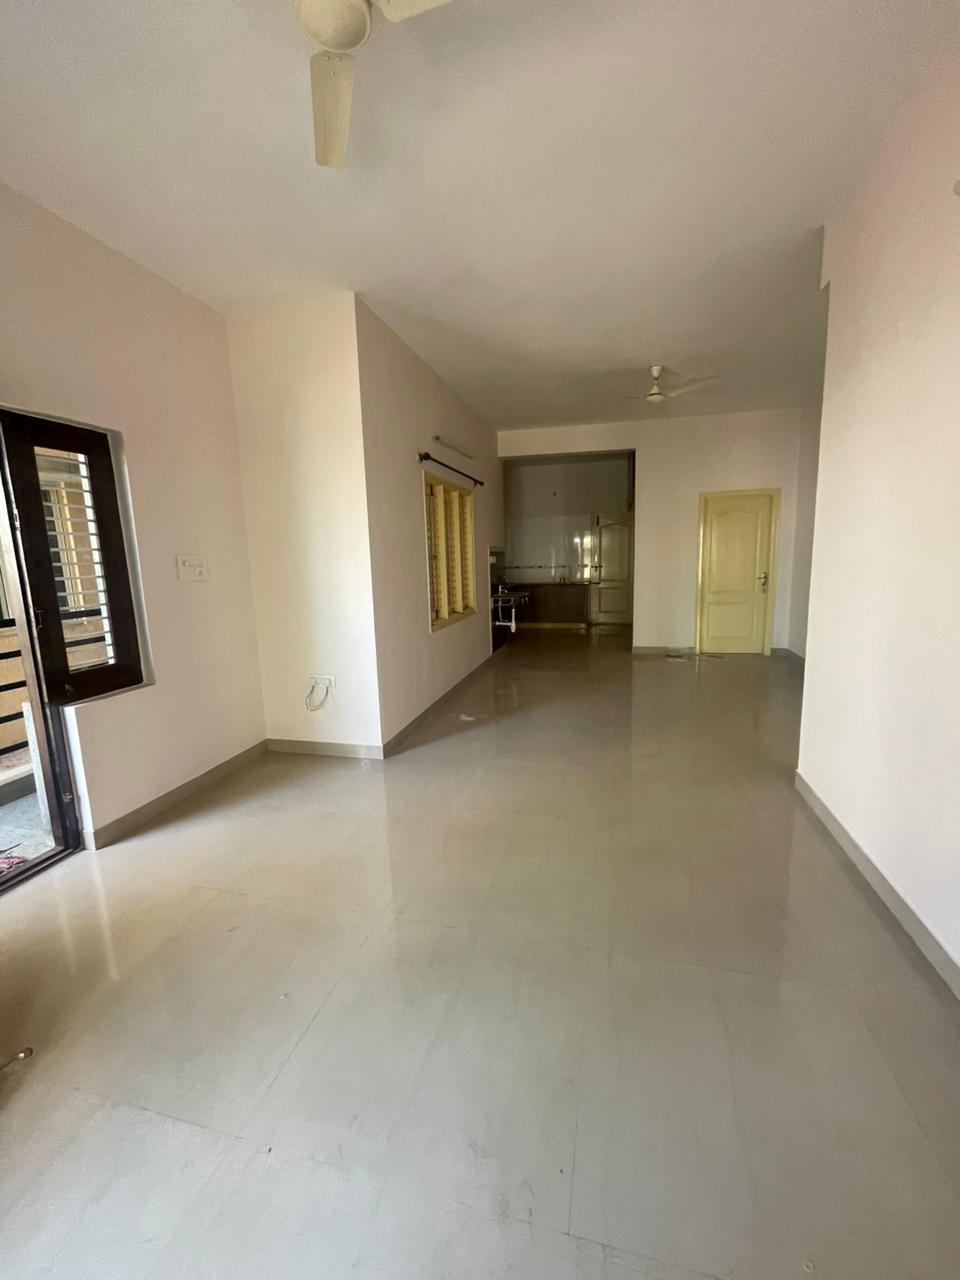 1 BHK Independent House for Lease Only at JAML2 - 2818 in Pattegar Palya